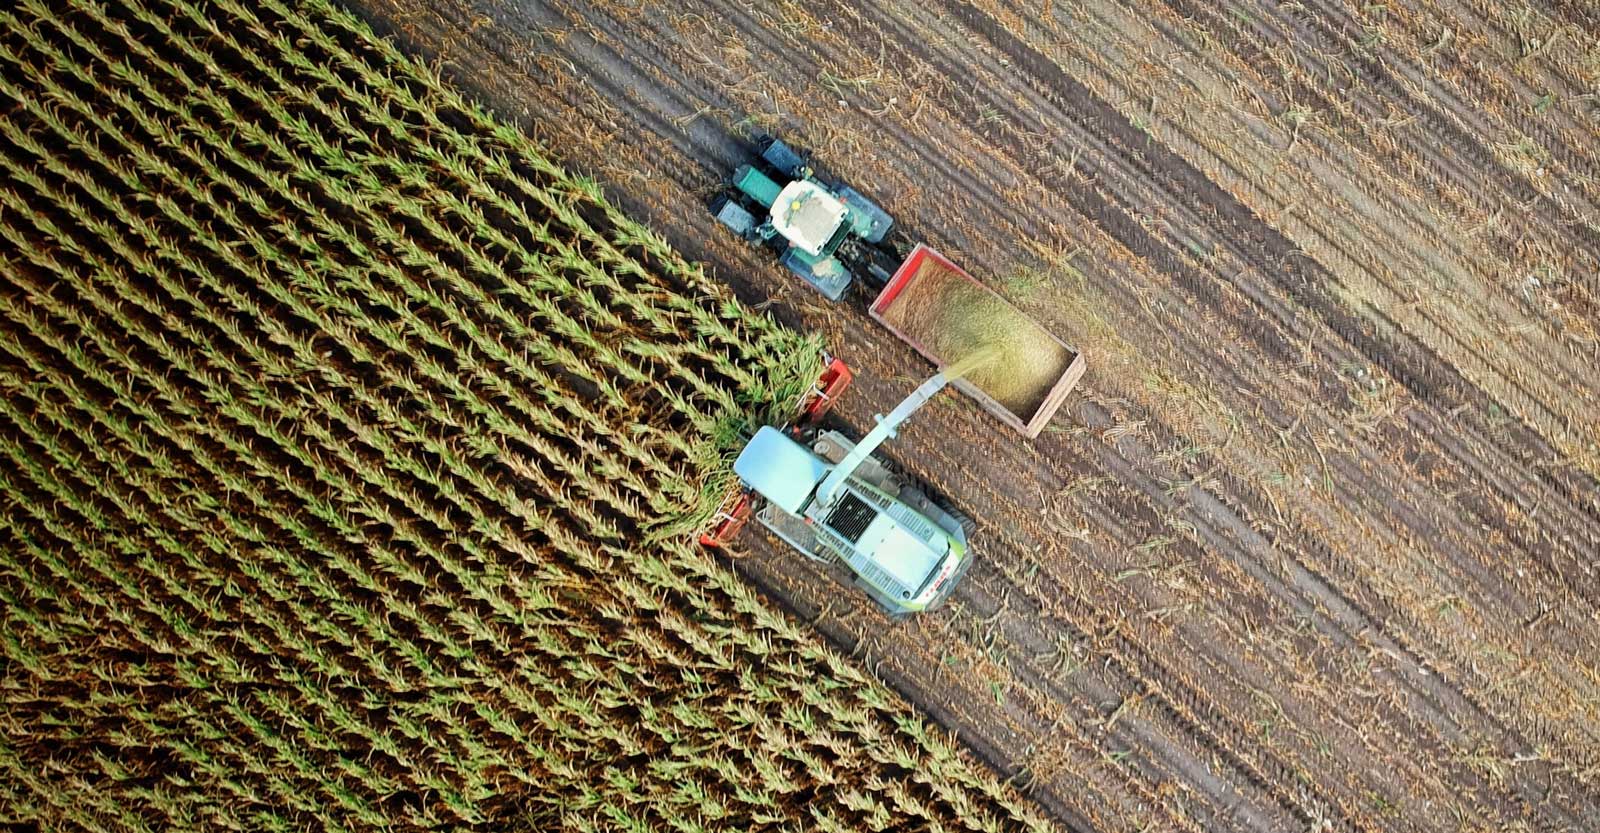 Trucks in an agricultural field